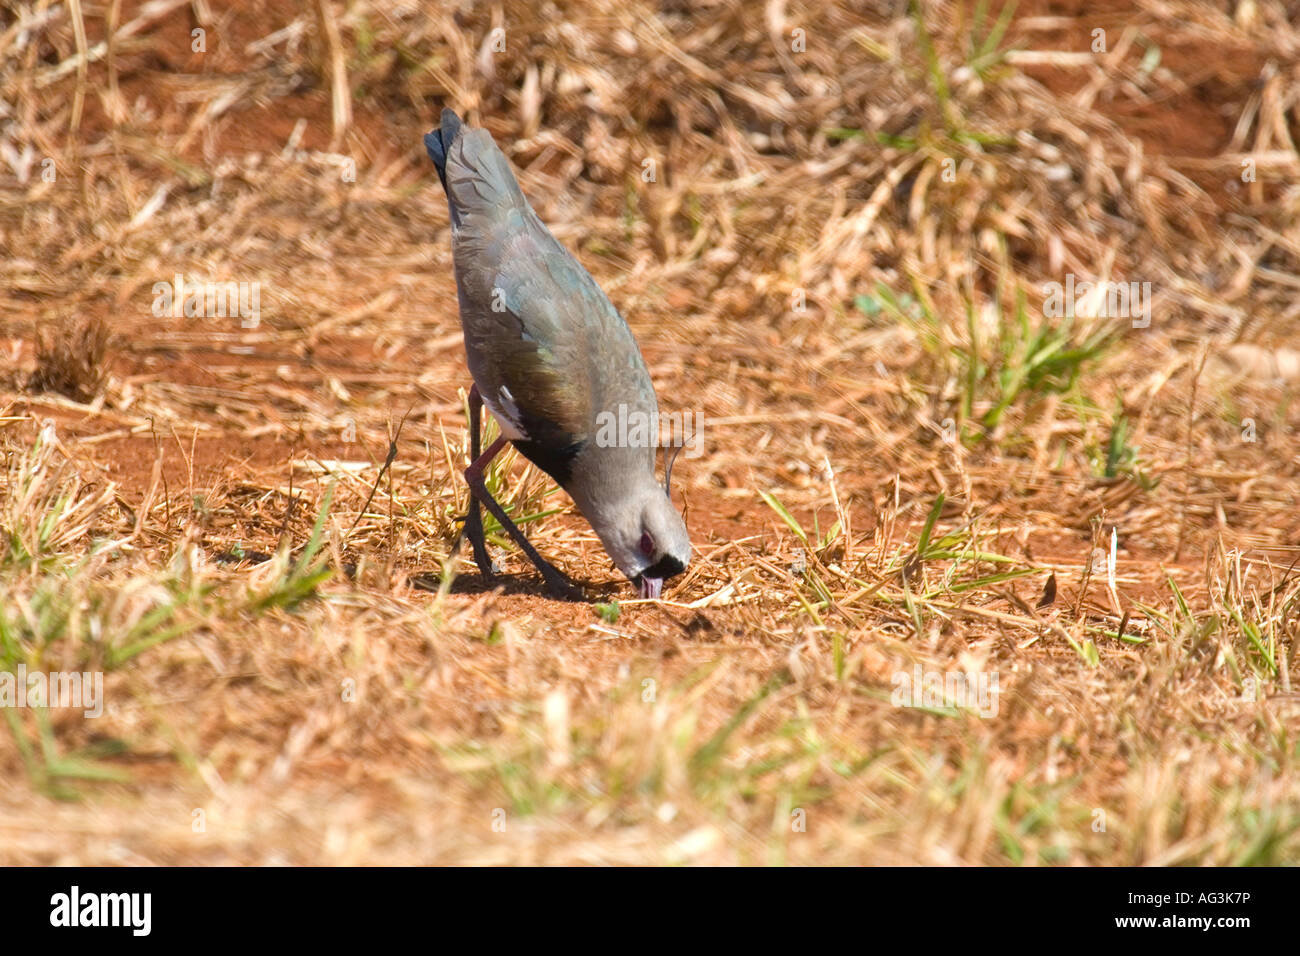 Picture of the Southern Lapwing - Vanellus chilensis. Image taken in the Brazilian Cerrado. Stock Photo